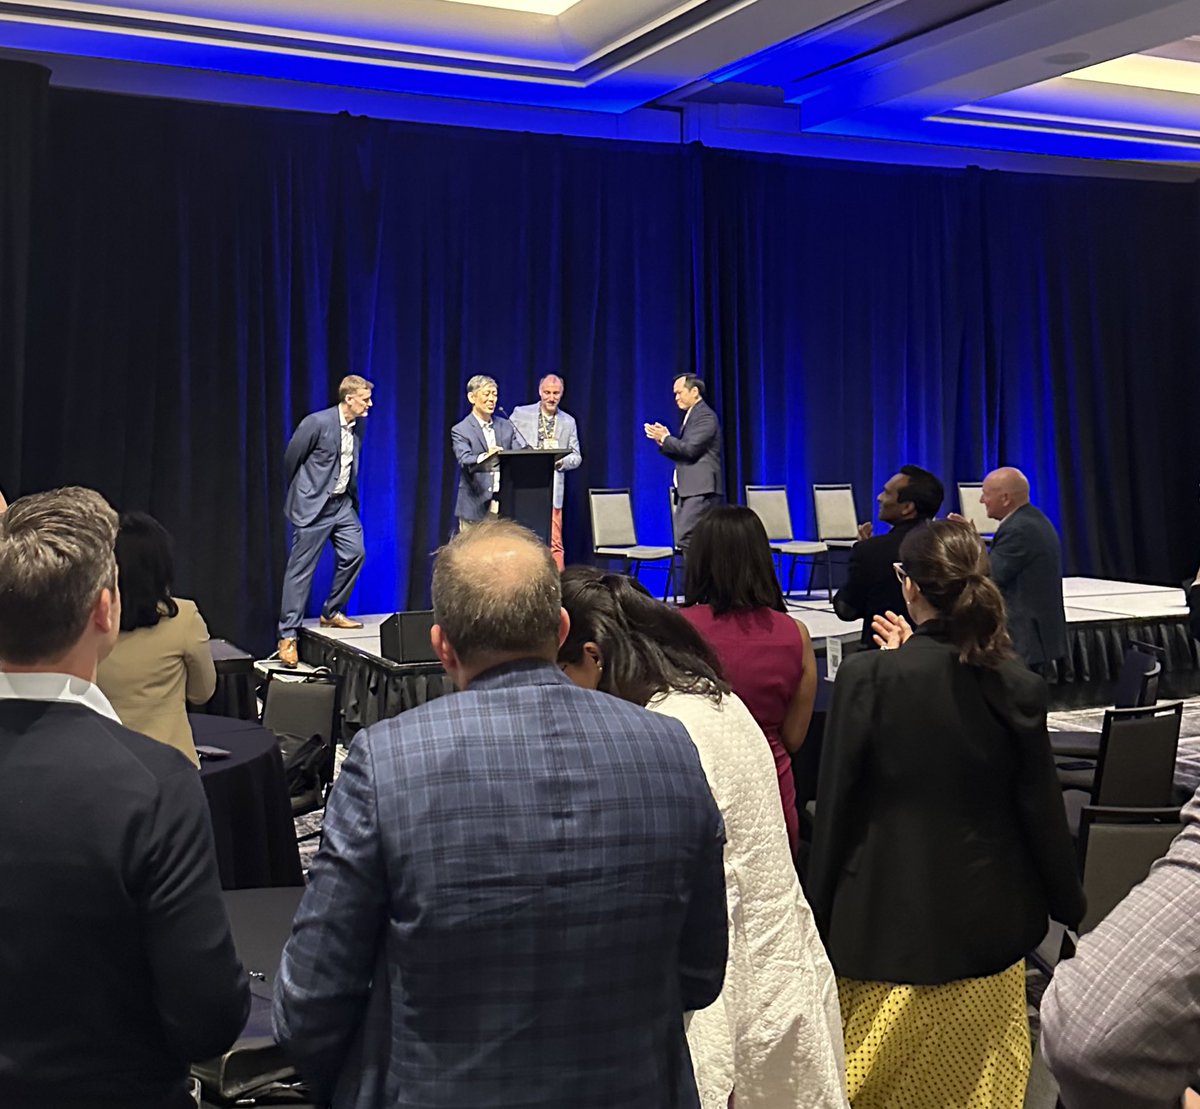 Standing ovation as @felixfengmd takes the stage for remarks. What a community he continues to build. Grateful to be here…. the future is bright. @UCSFUrology @UCSFCancer